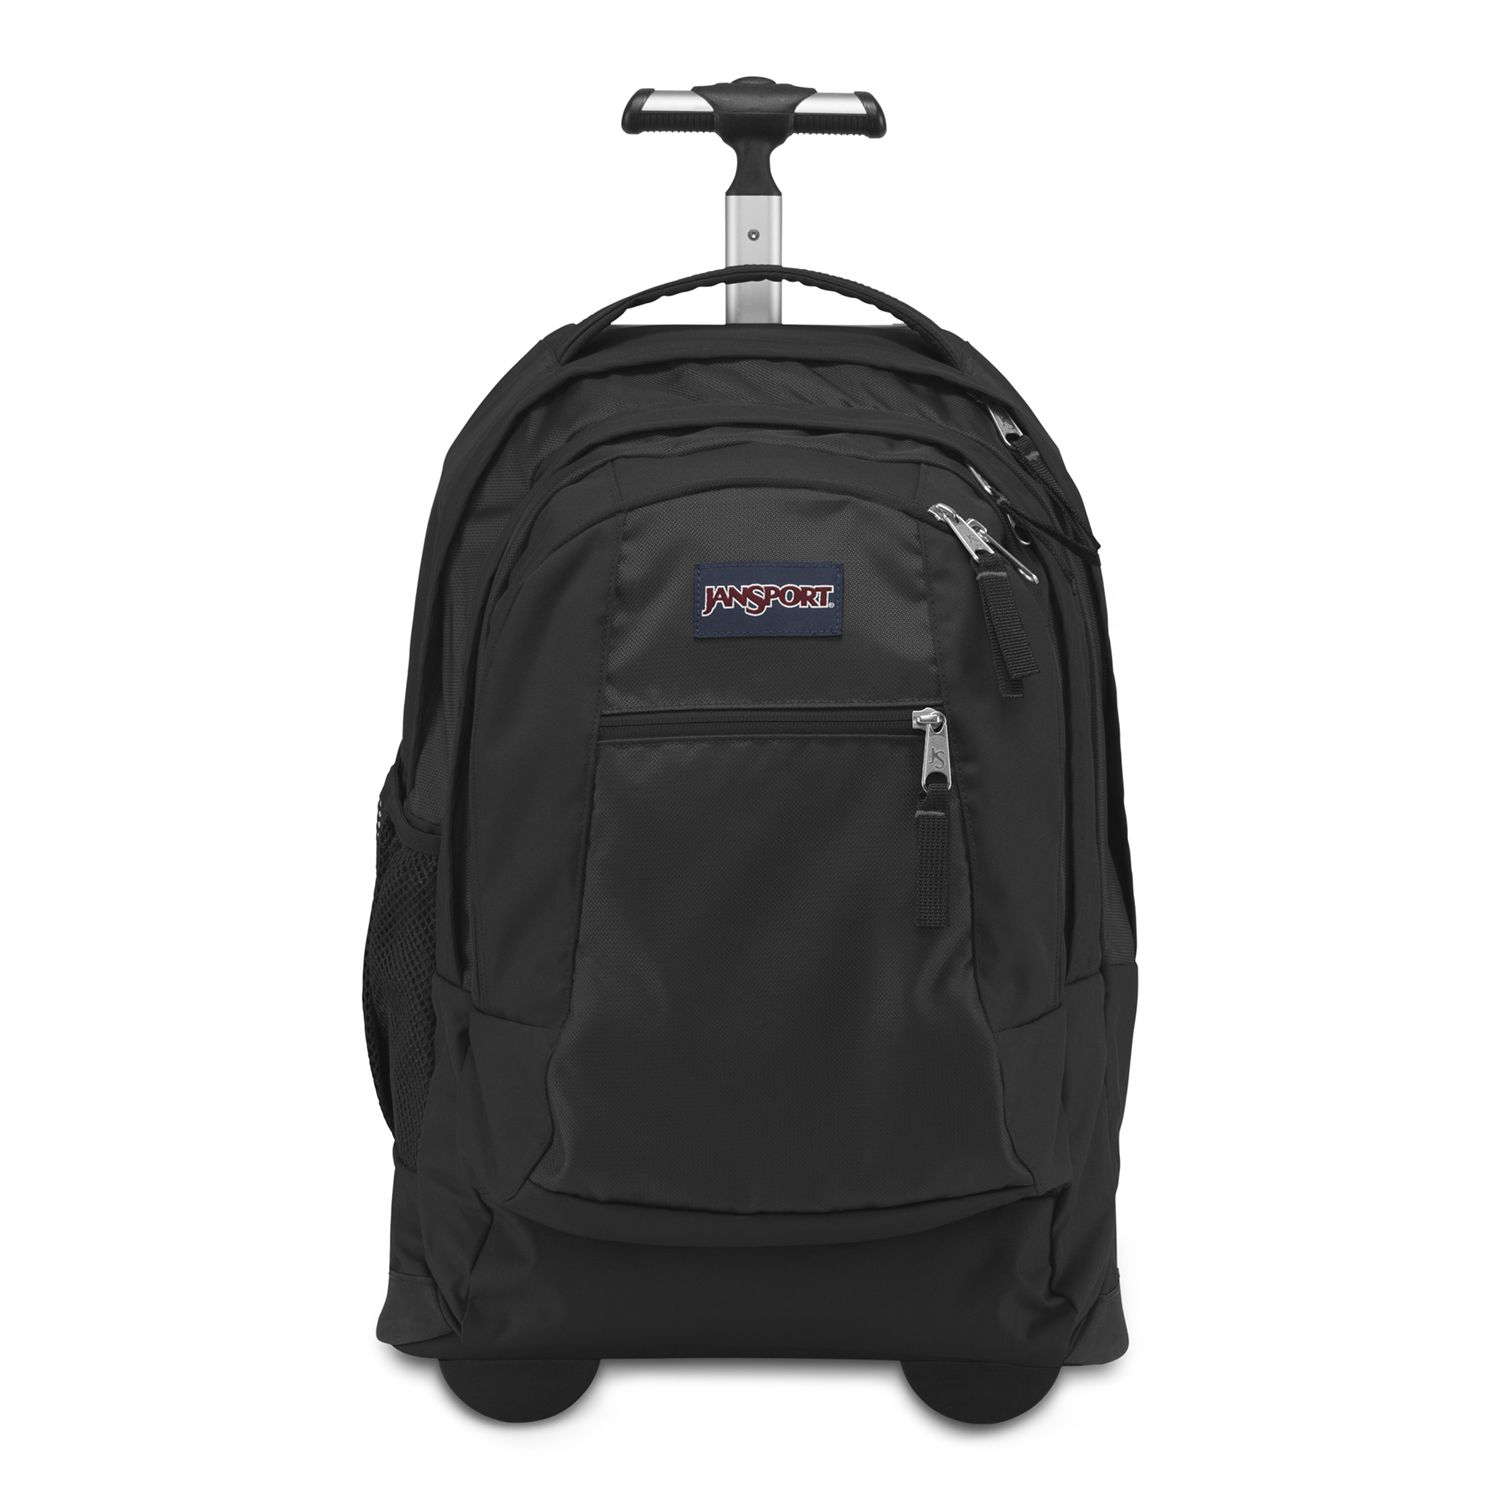 cheapest place to buy jansport backpacks